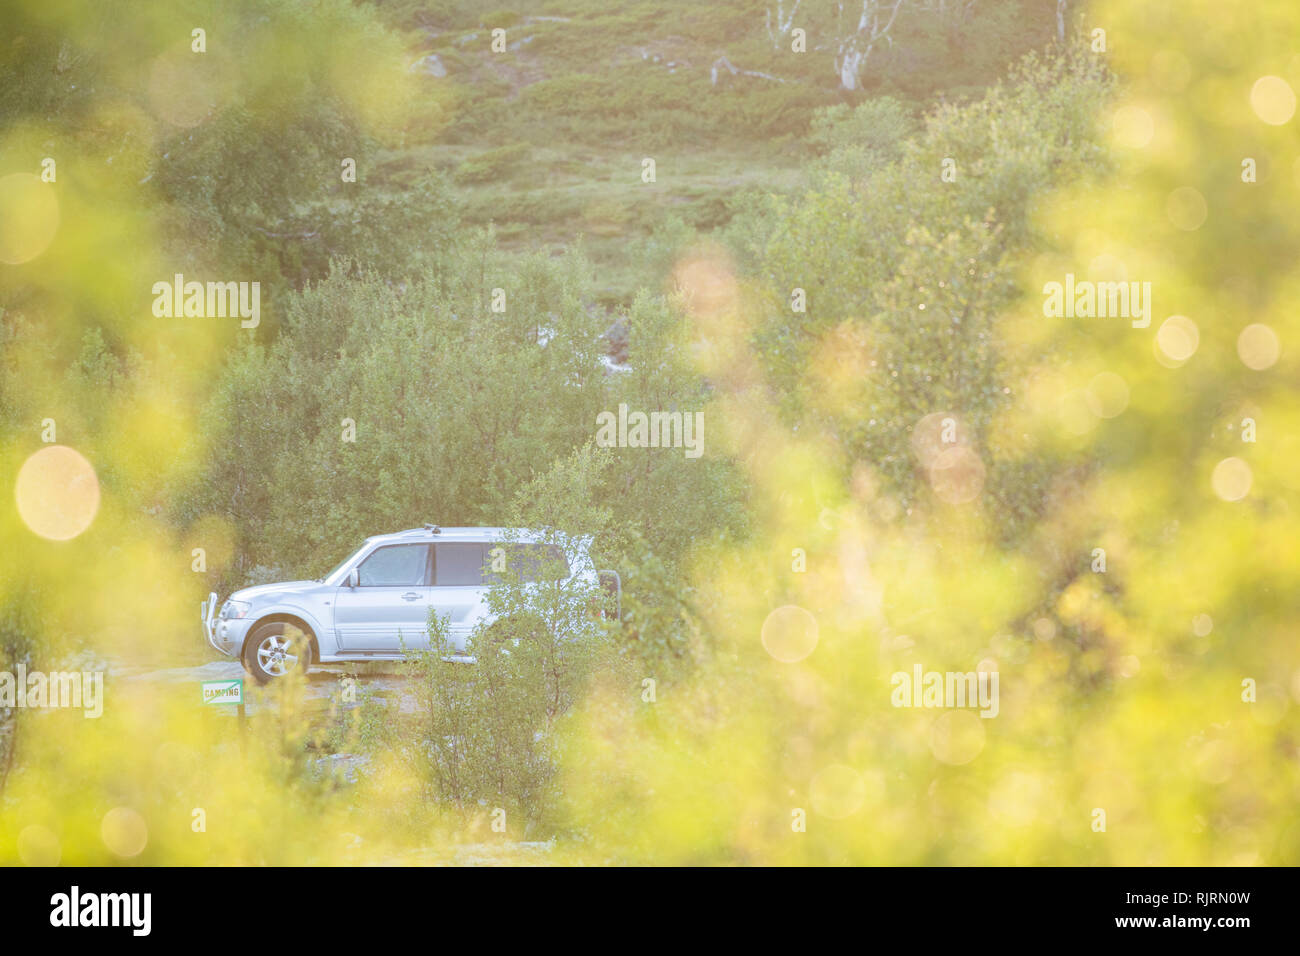 Looking through foliage to stationary silver four wheel drive car by hillside, side view Stock Photo